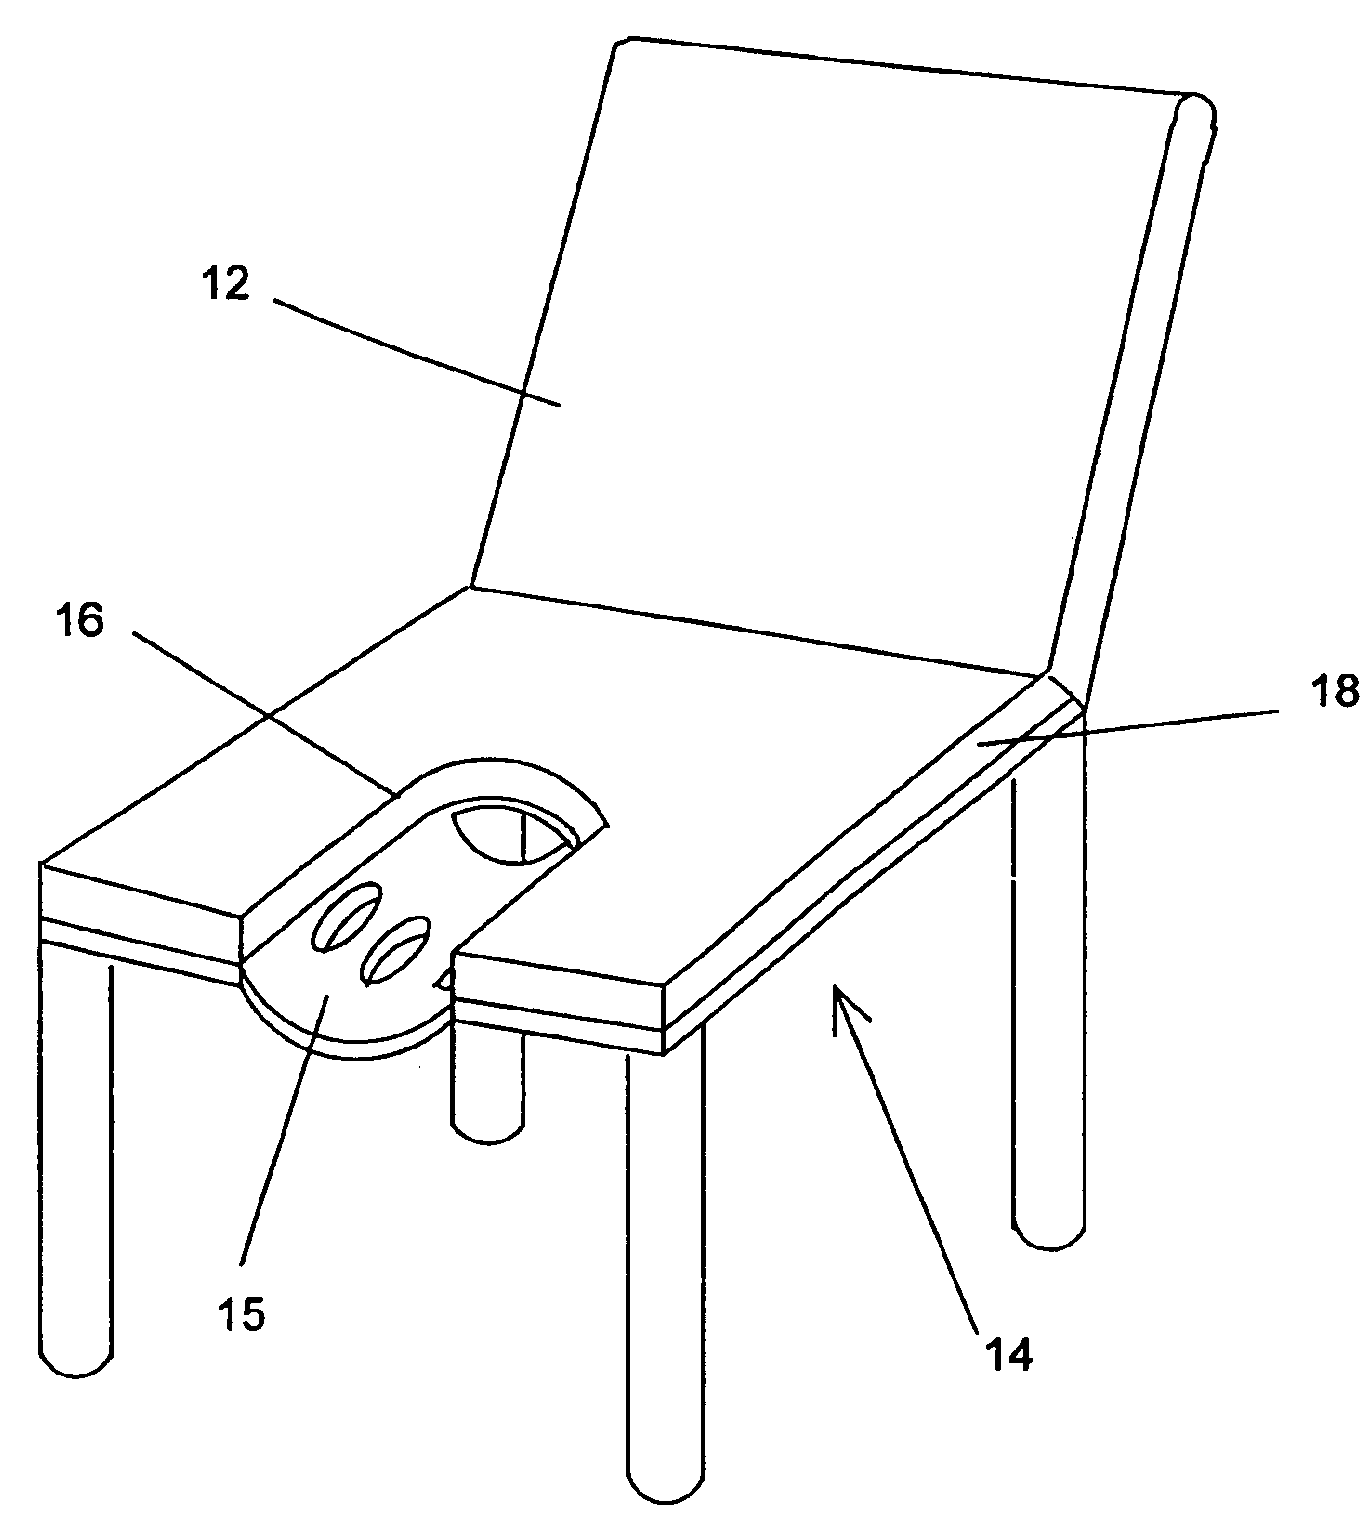 Seat with contoured-front for localized body heat dispersion and pressure reduction